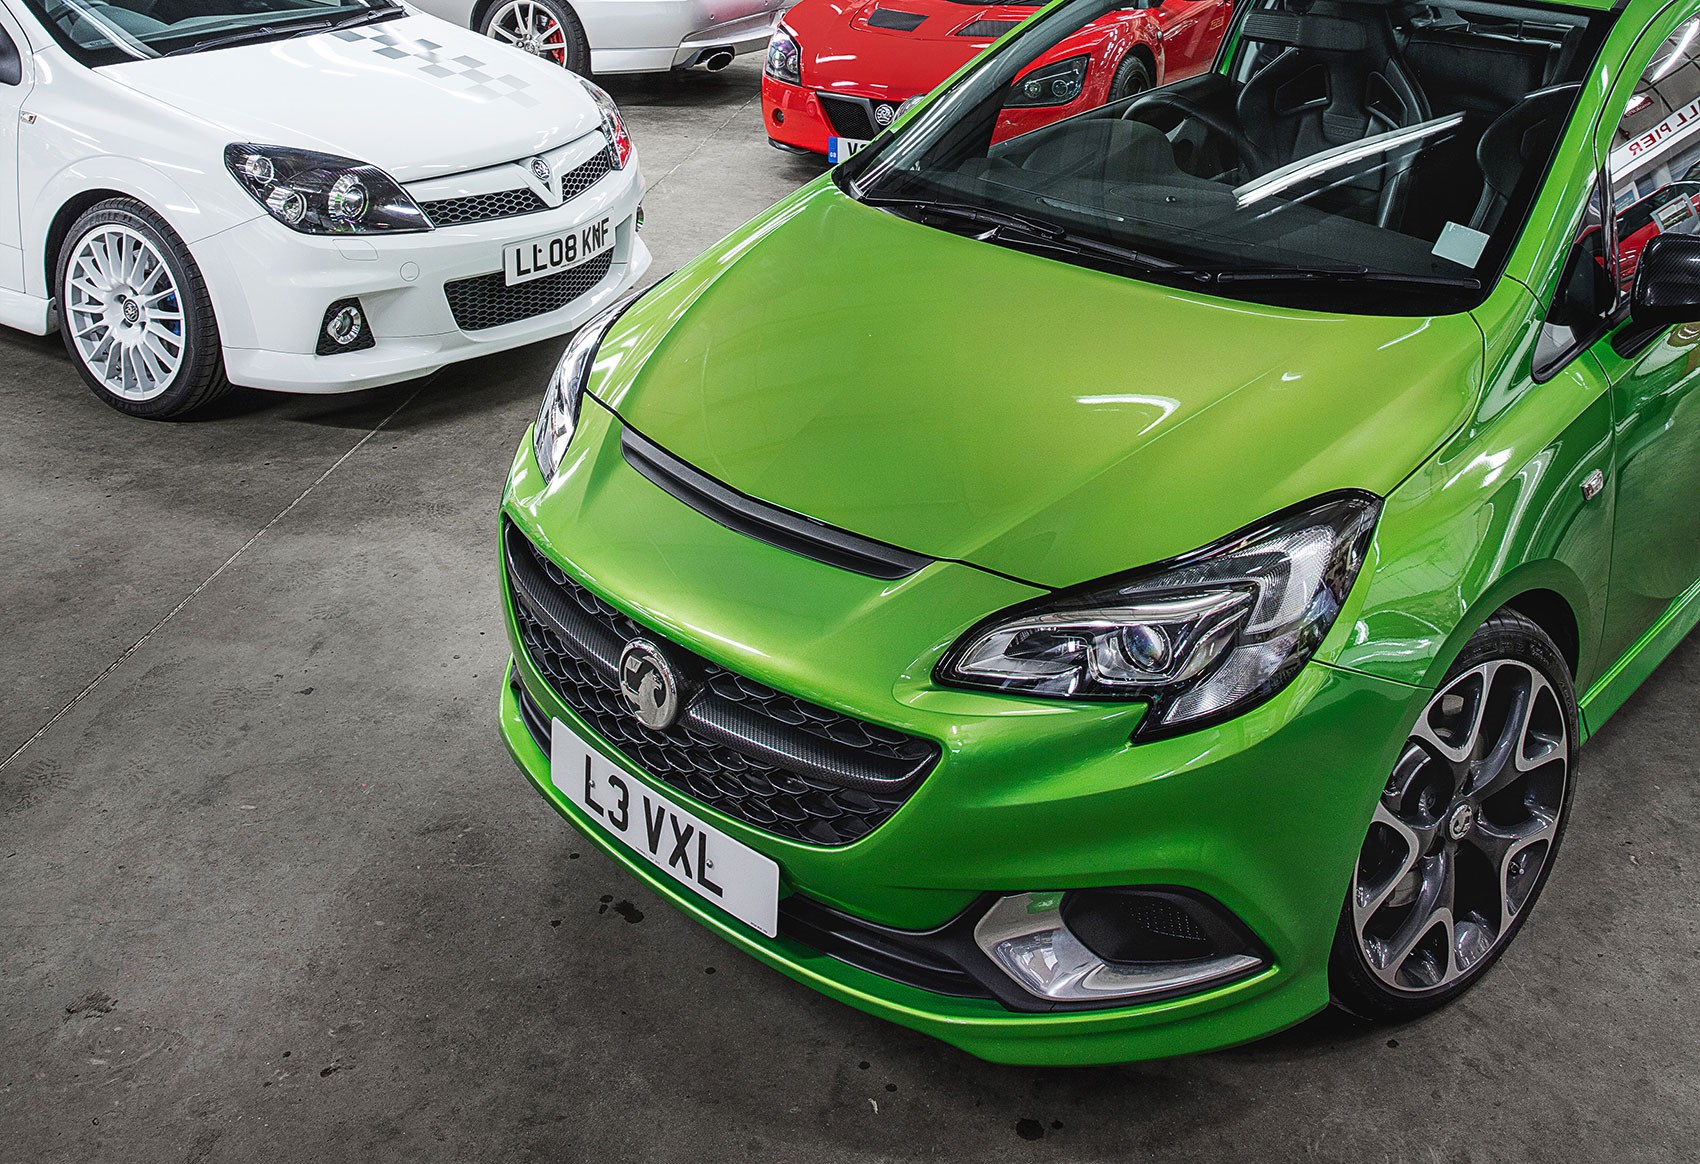 Vauxhall Corsa becomes surprising addition to museum's collection